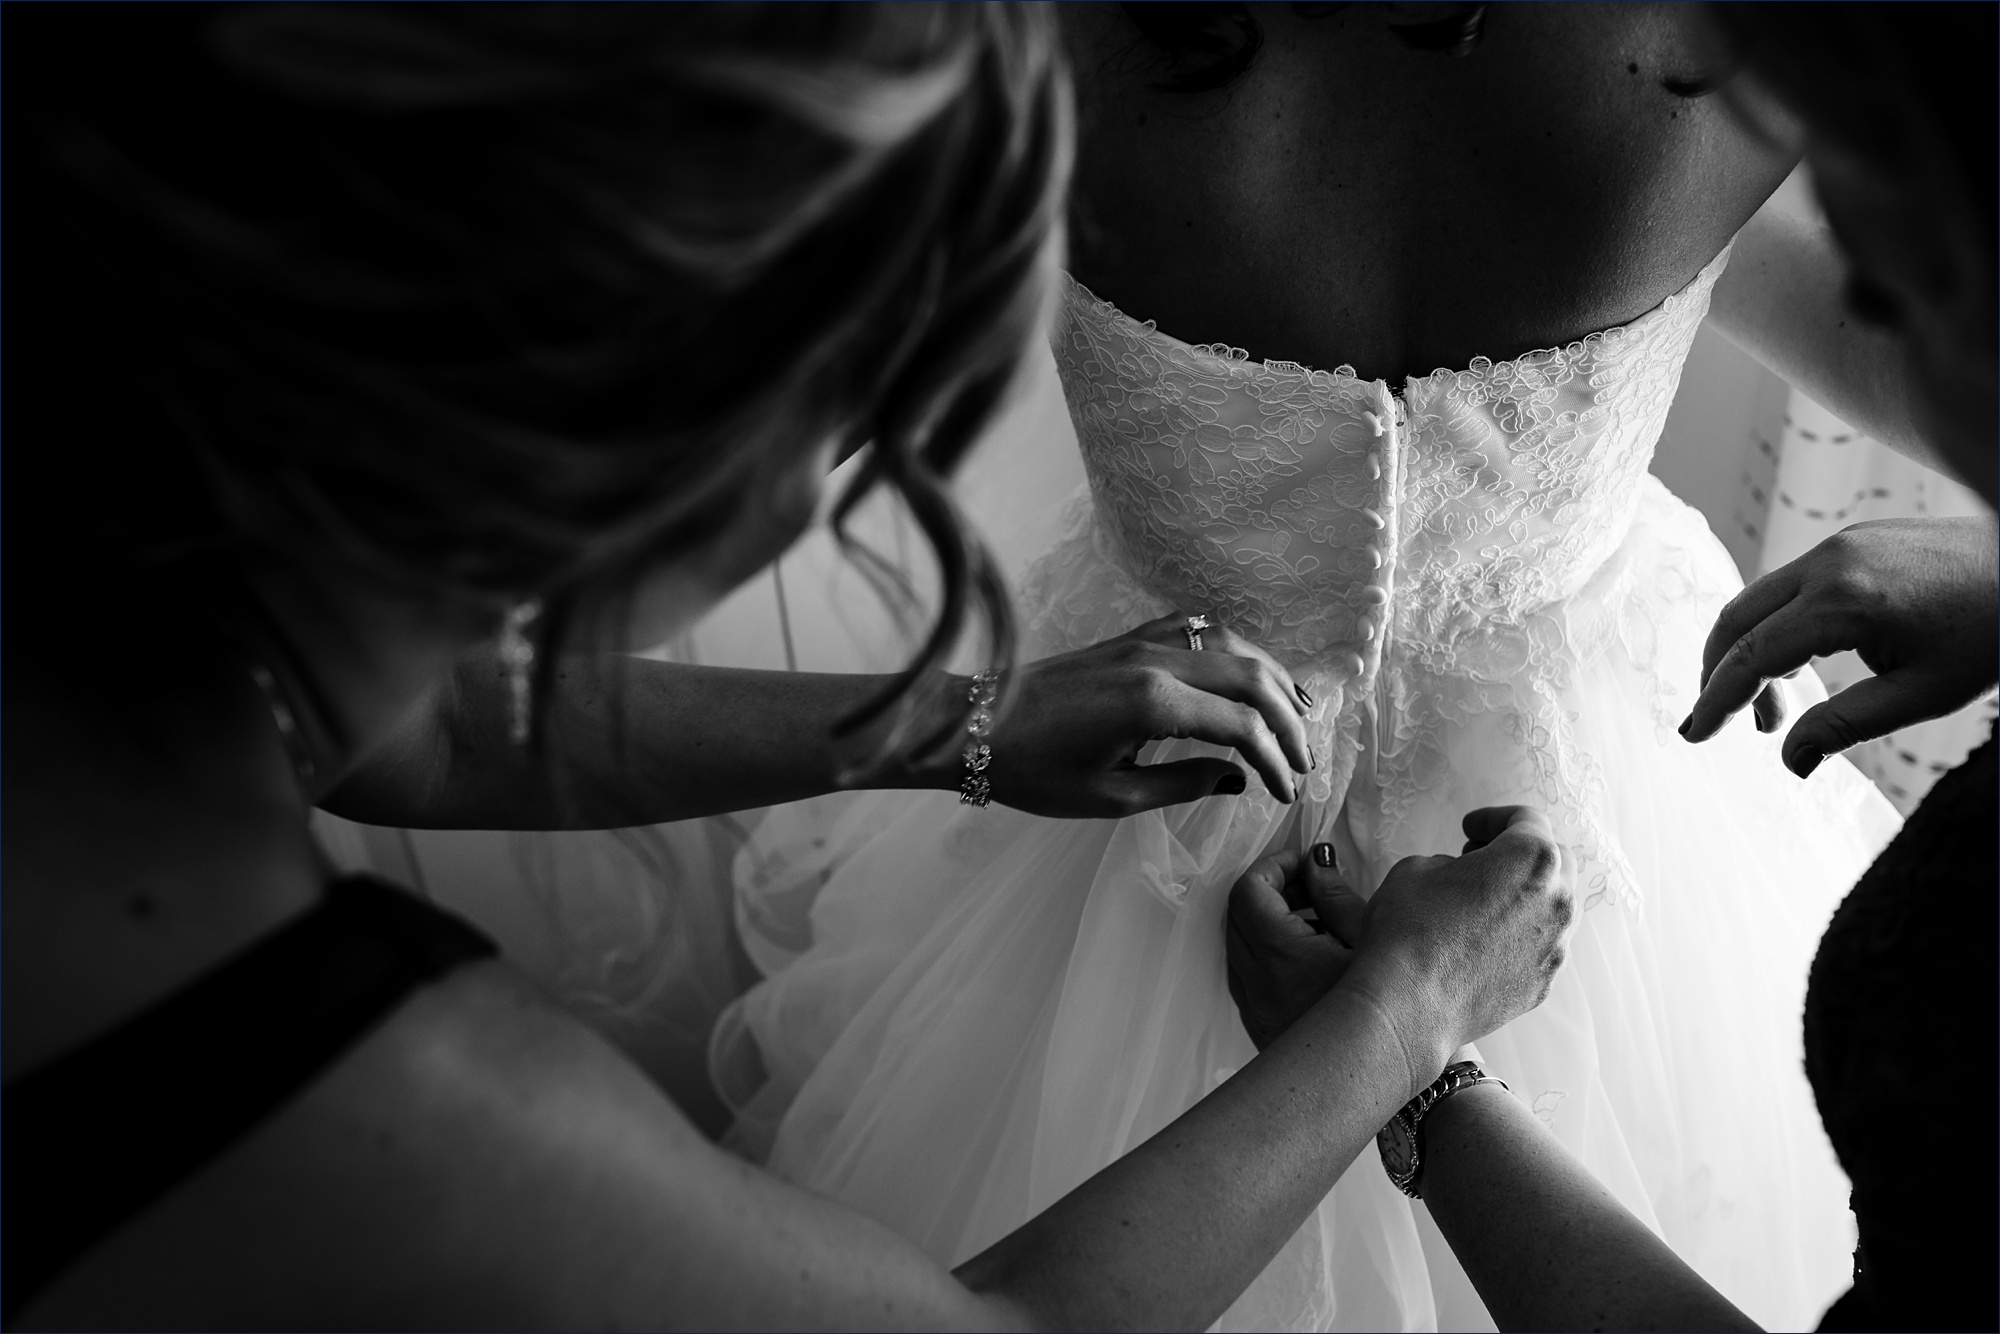 Getting the bride in her wedding day dress